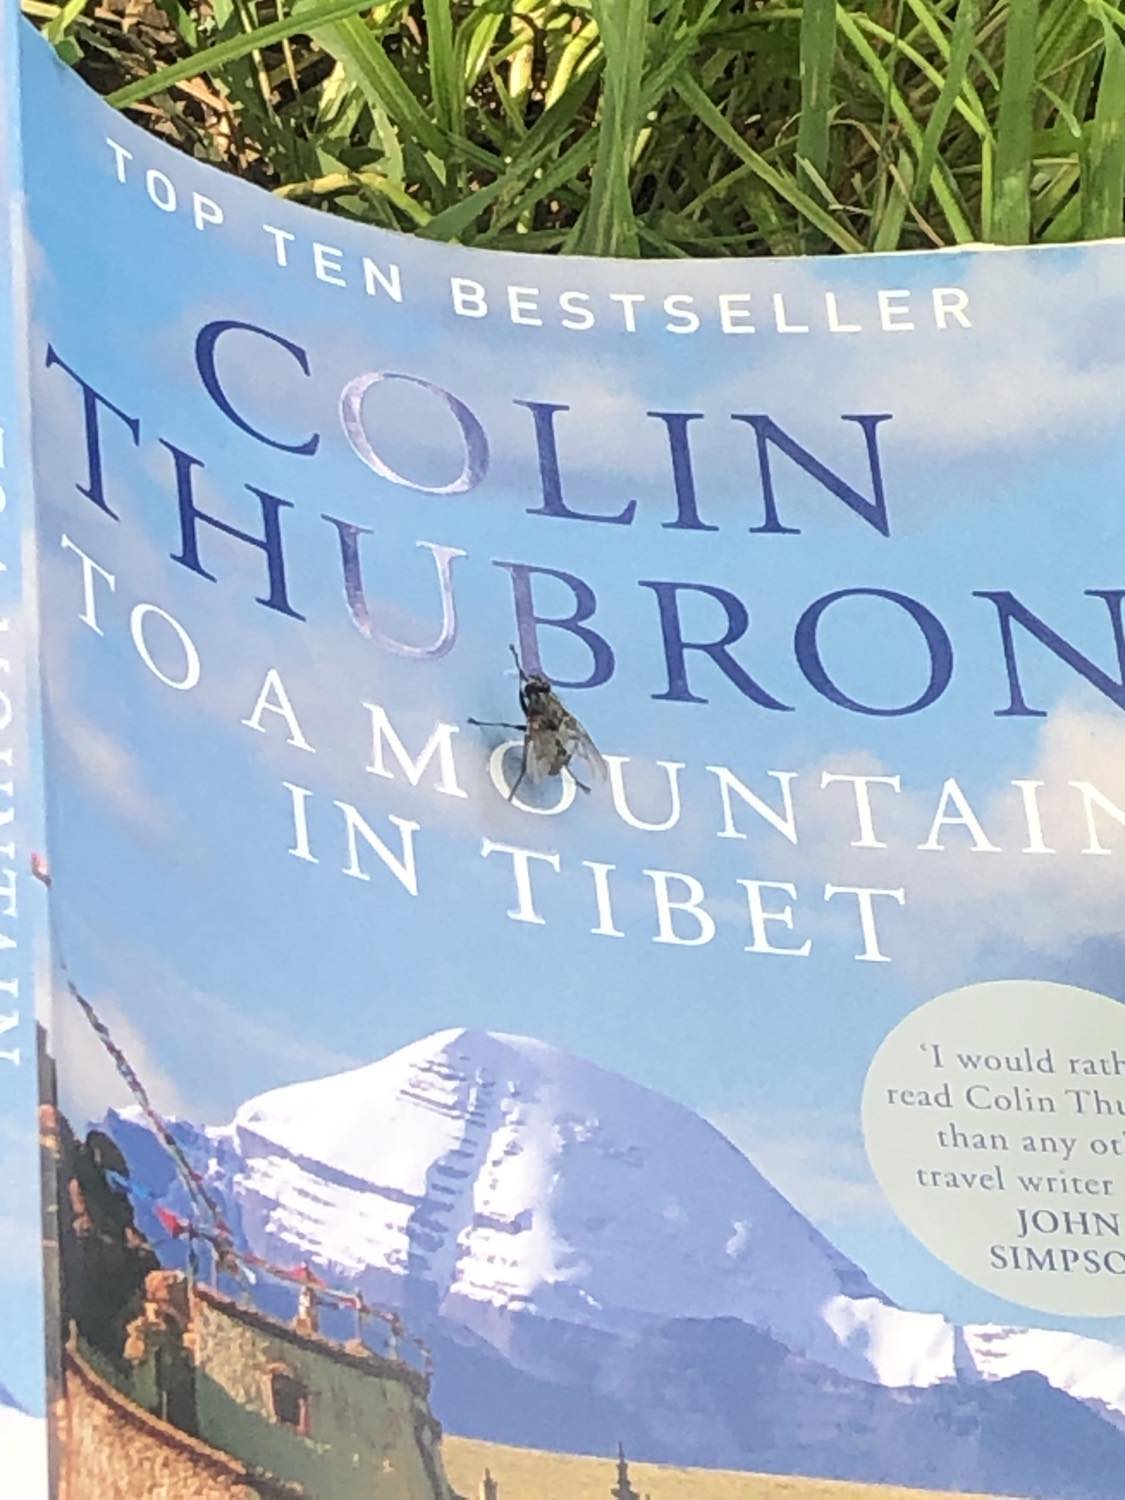 Our fly friend sitting on the cover of the book 'To a mountain in Tibet', which is laying face-open on the grass. The fly appears to be in the middle of cleaning himself, sitting on top of the O of mountain.